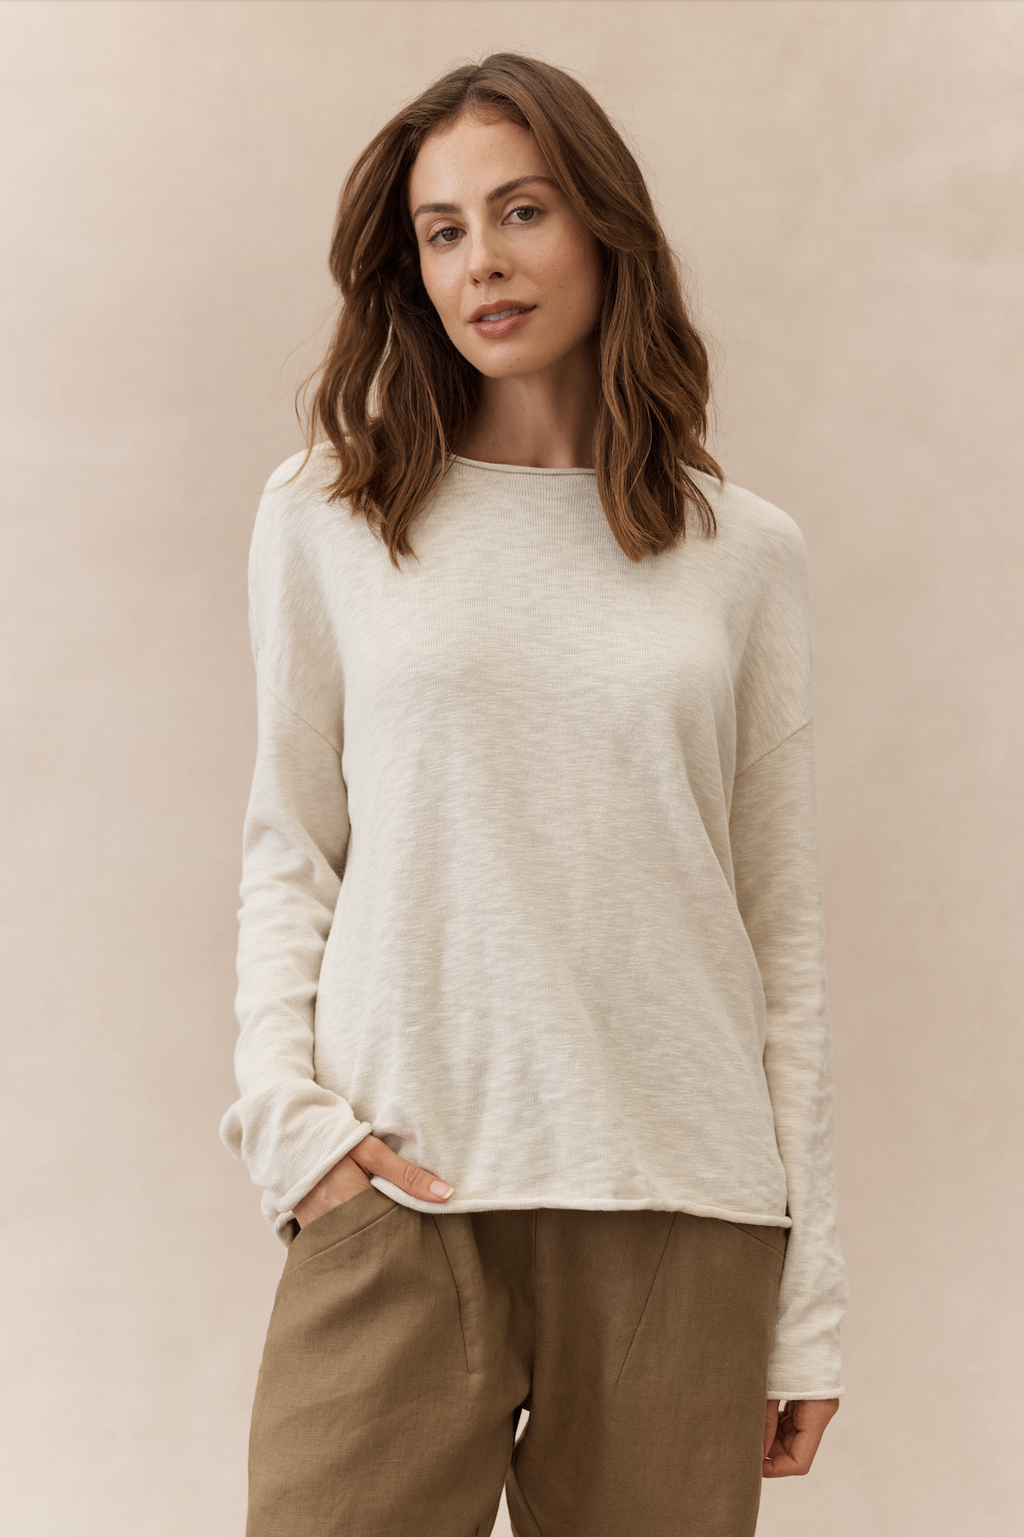 the nellie top by Little Lies is a long sleeve cotton slub weave textured top